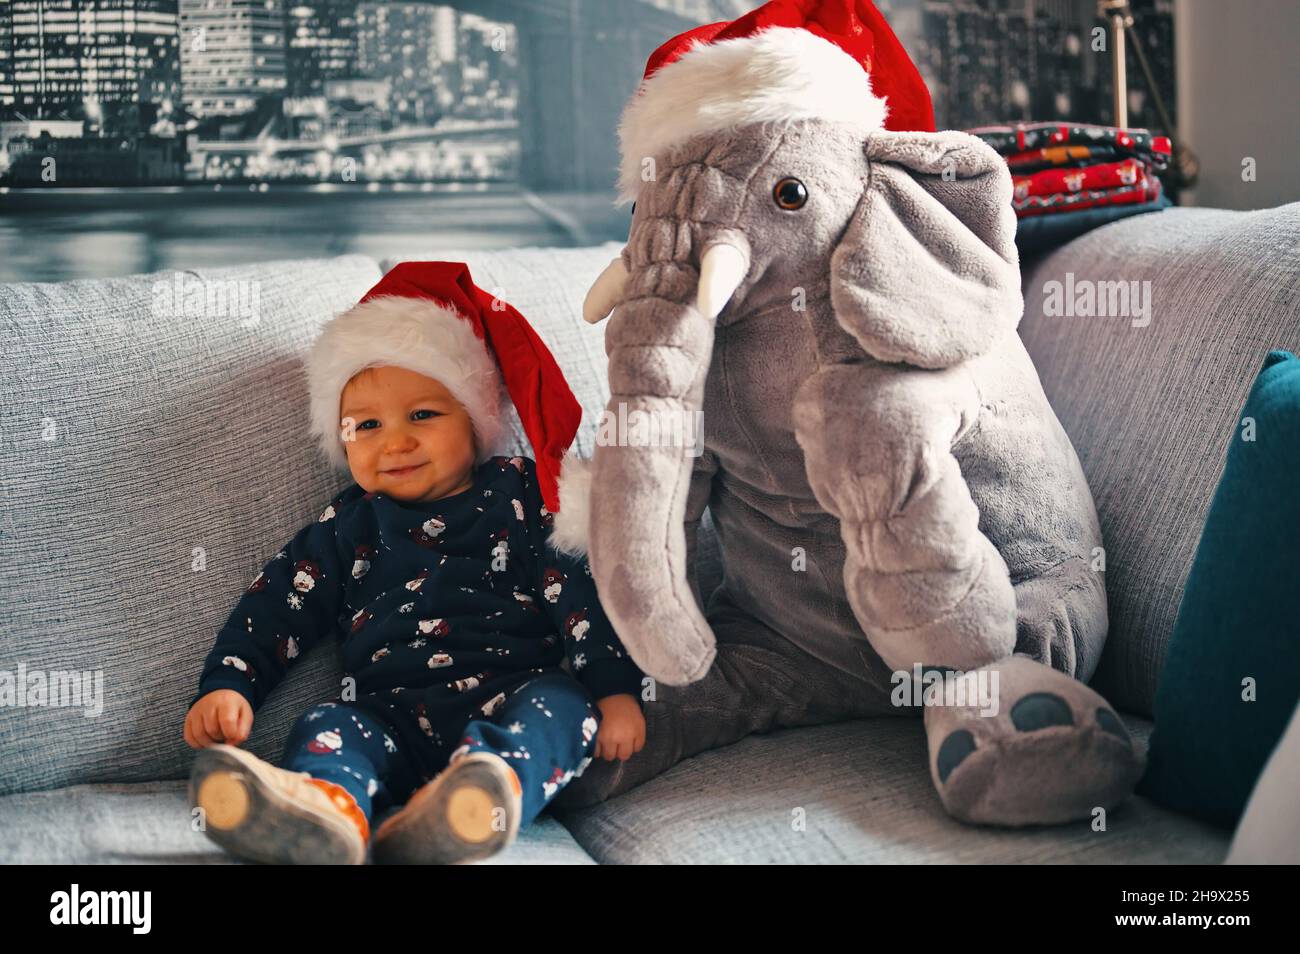 Cute little boy in Christmas costume and Santa hat with stuffed elephant sitting on a sofa Stock Photo